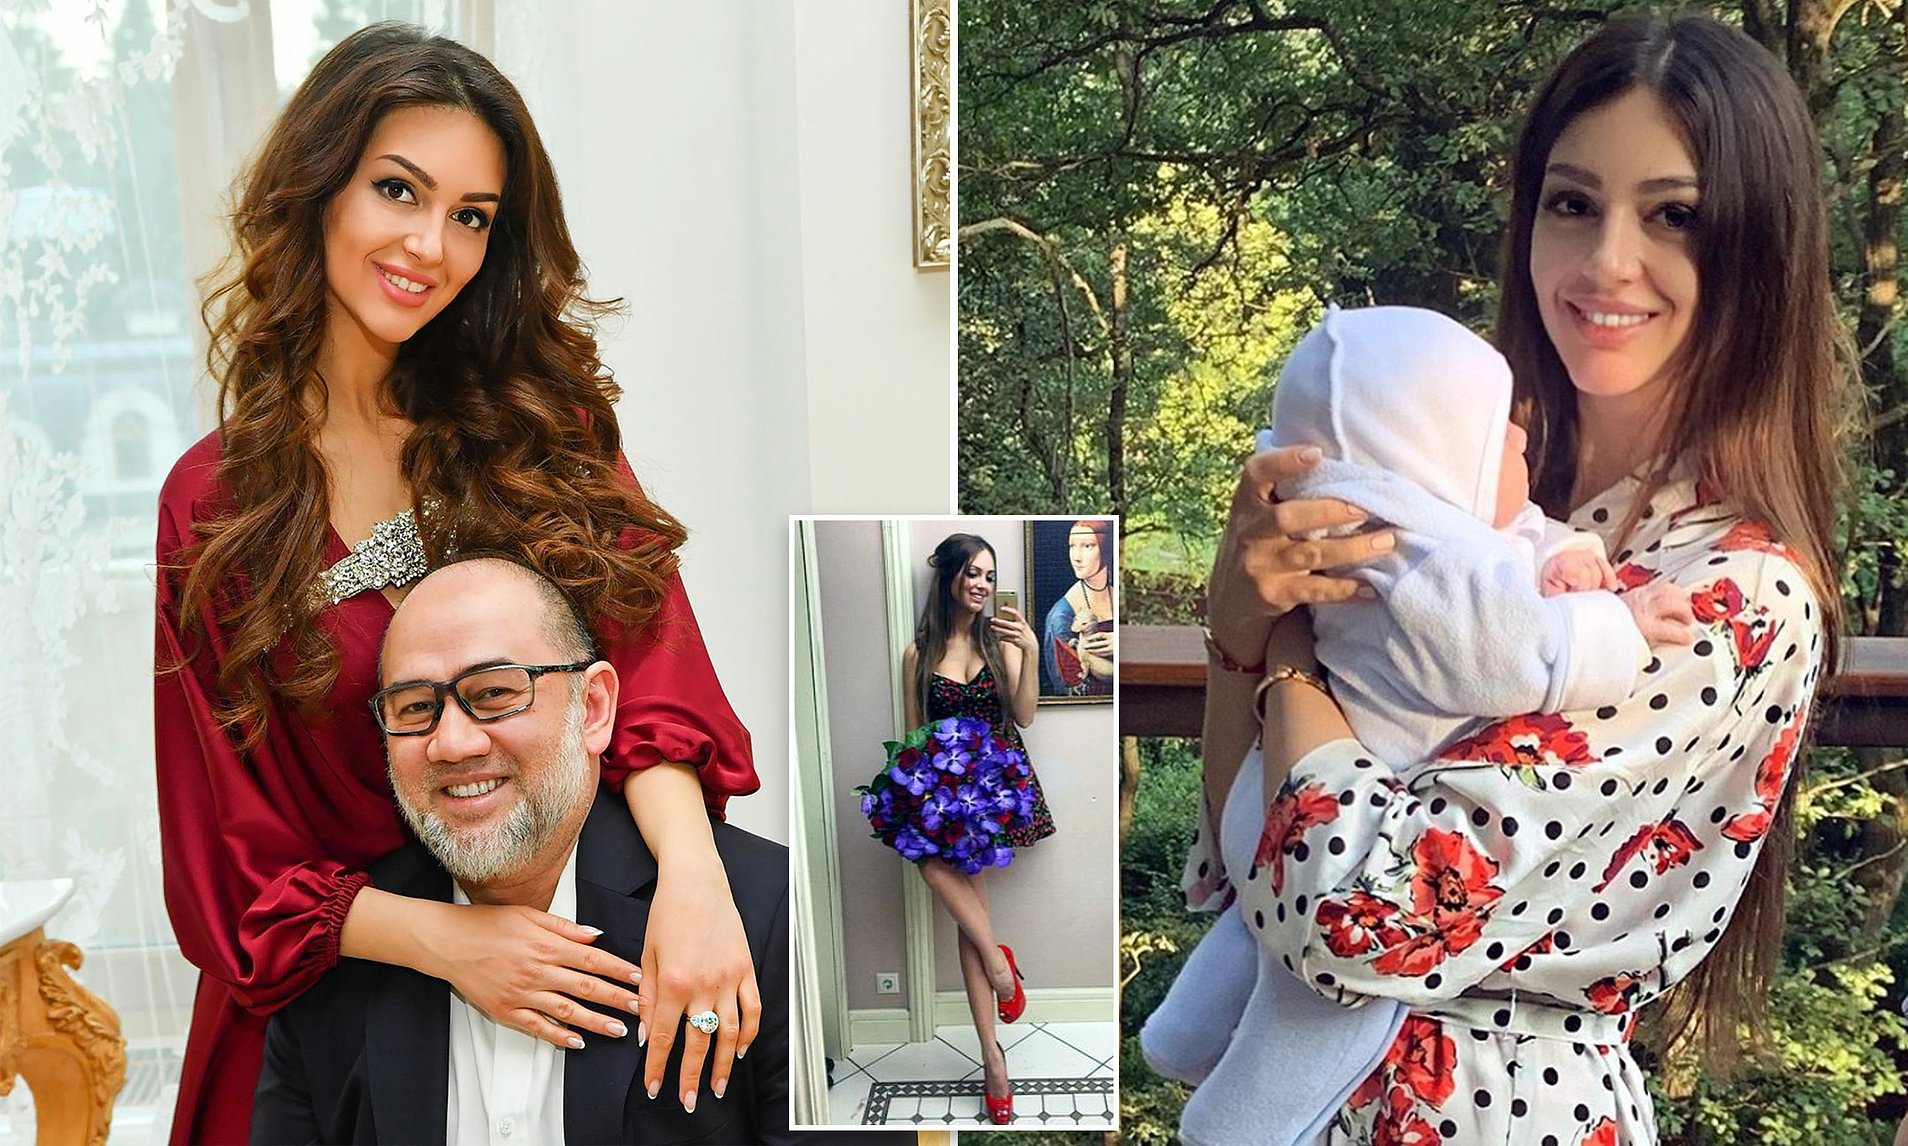 Russian beauty queen challenges the ex-King of Malaysia to take a paternity test after he DISOWNED their 'son' and divorced her six months after relinquishing his throne to marry her